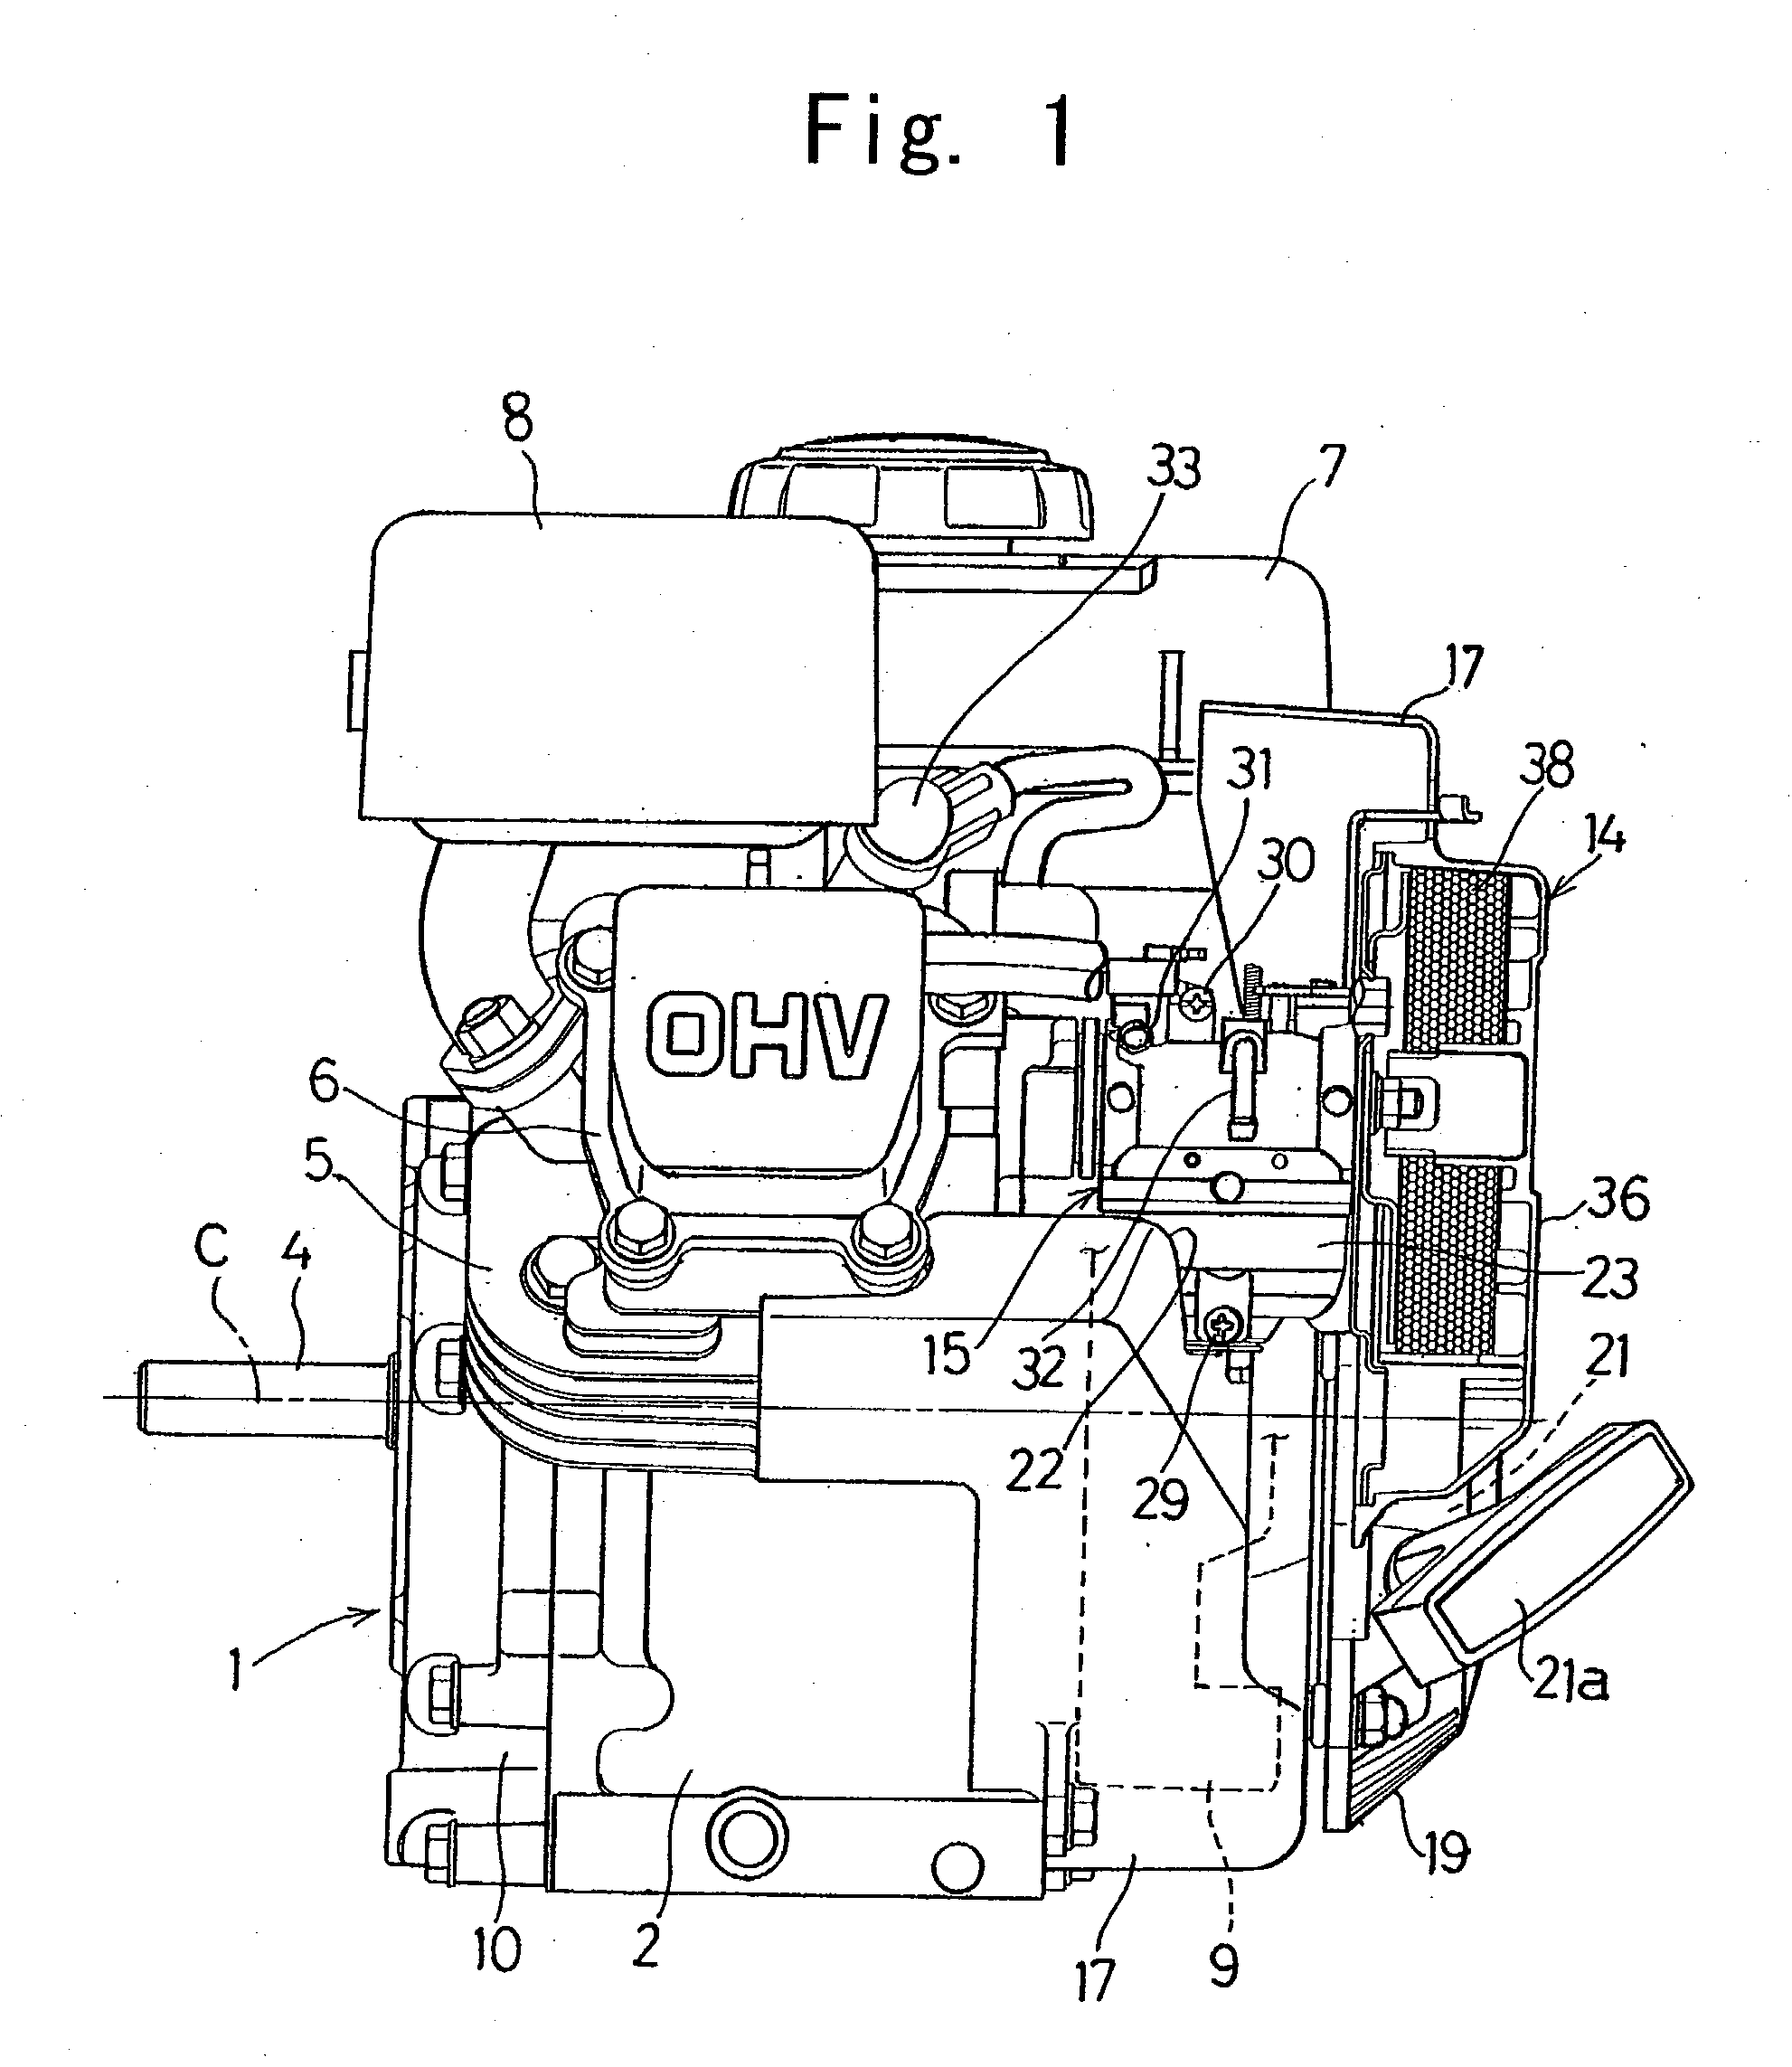 Small-size engine with forced air cooling system